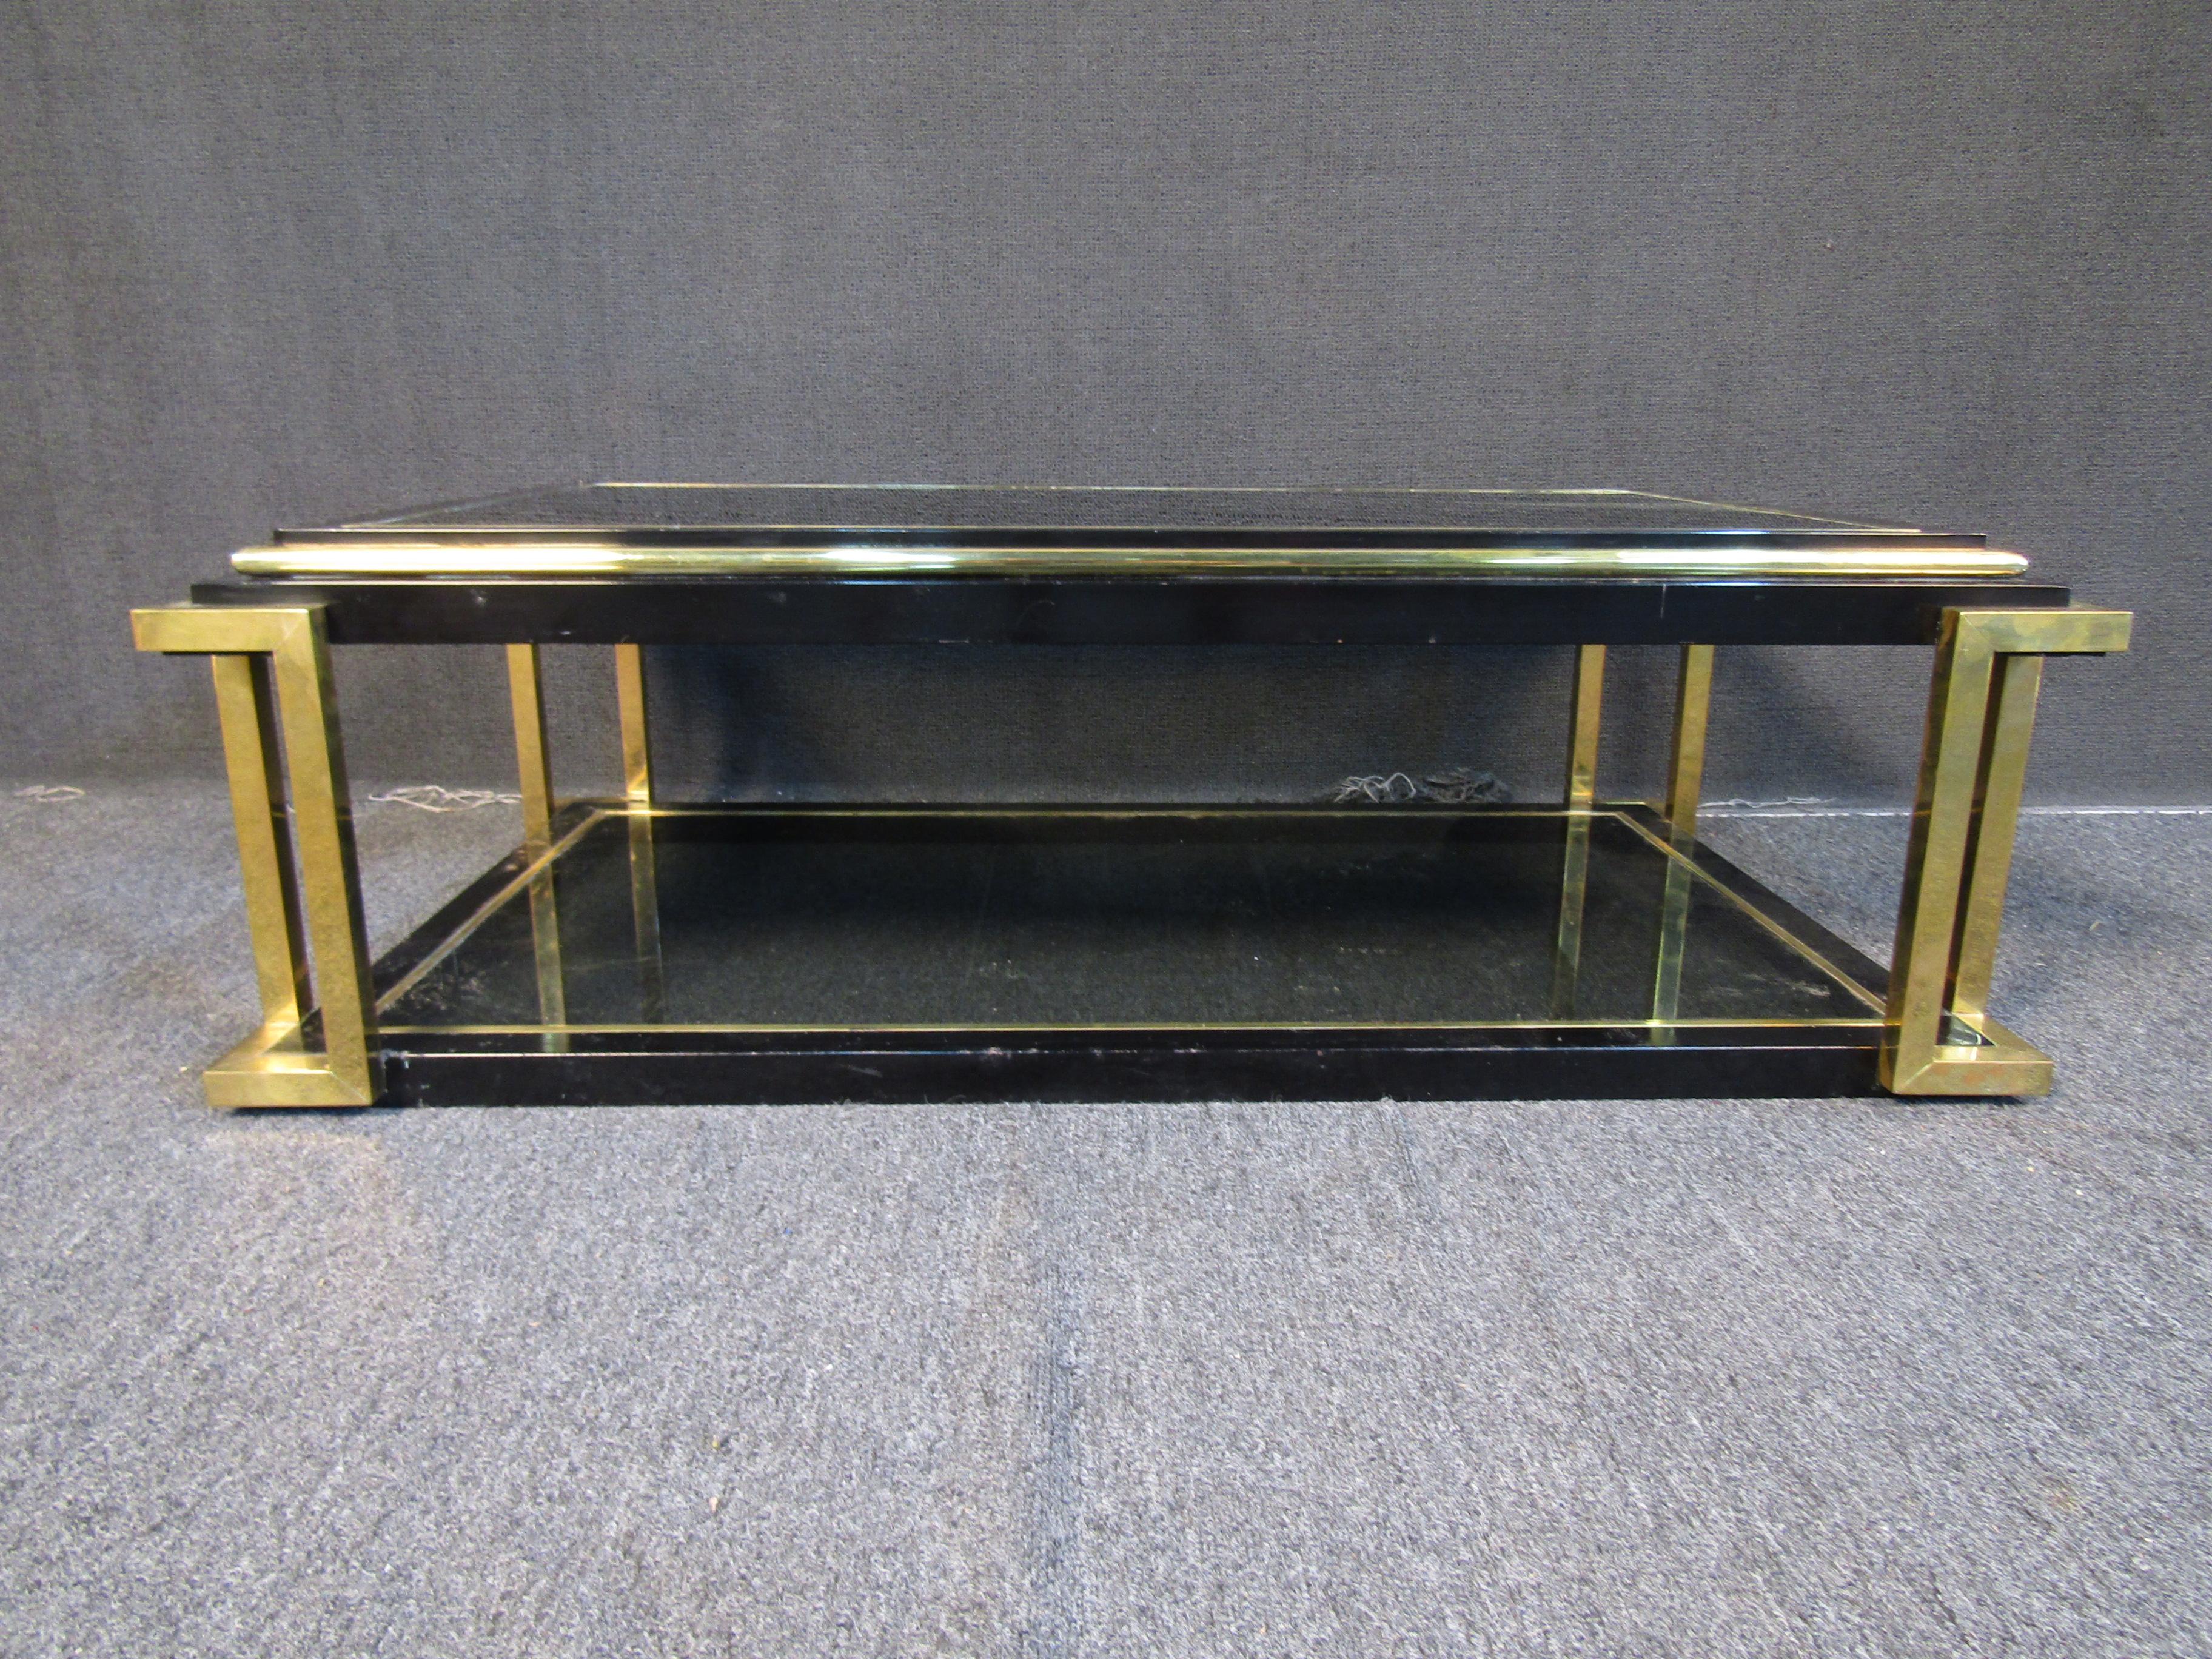 This ornate vintage coffee table features panels of dark glass combined with a frame of brass and ebonized components. Please confirm item location with seller (NY/NJ).